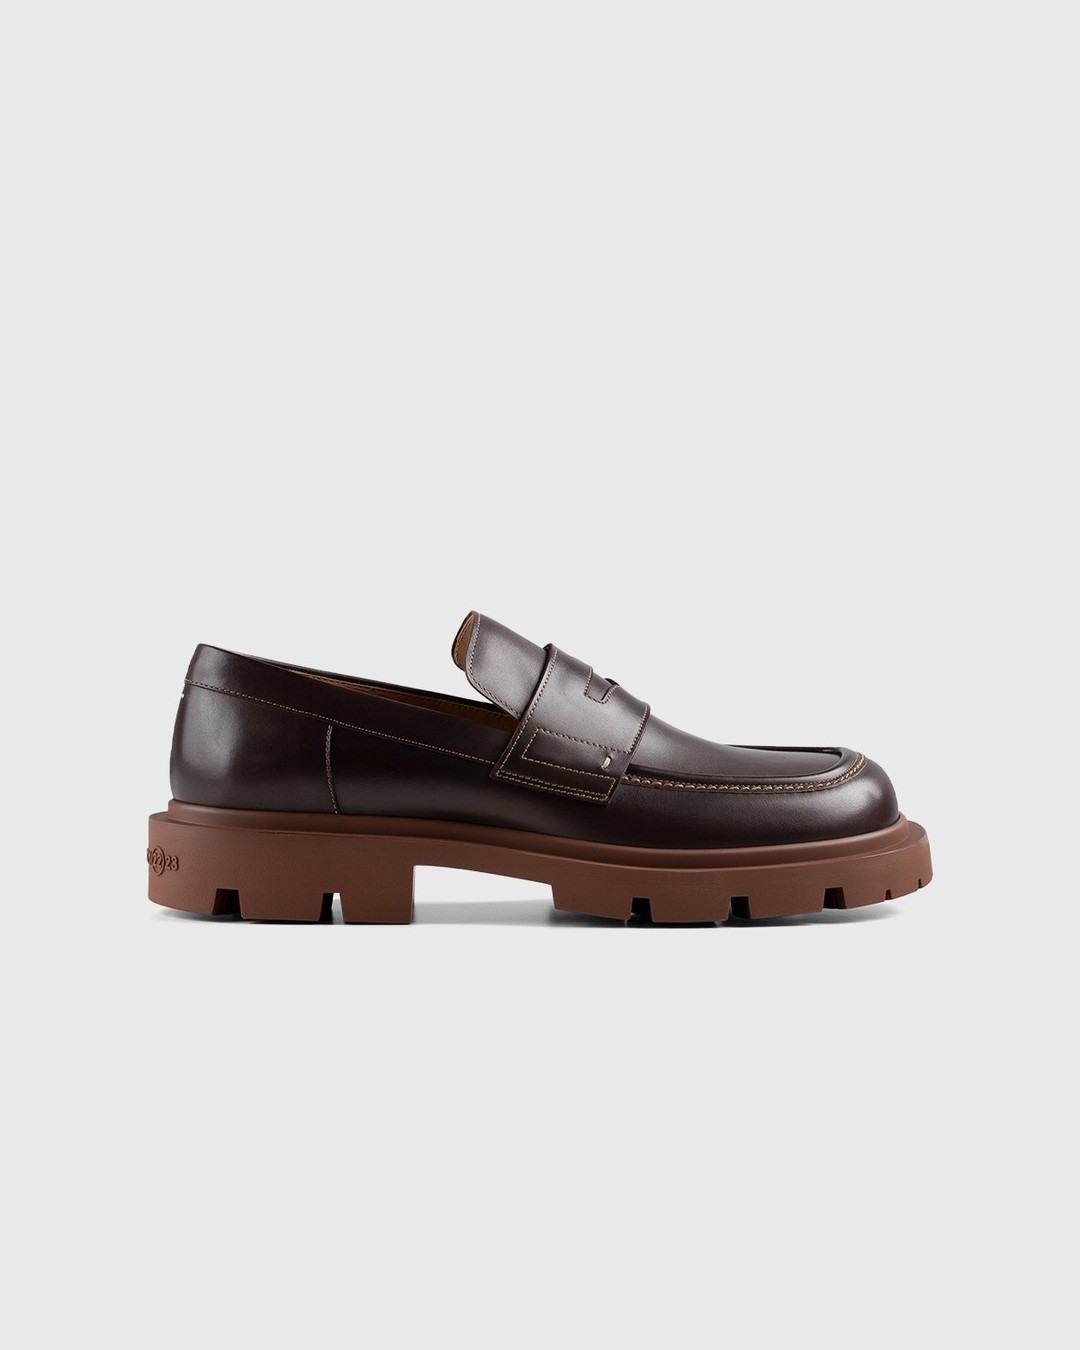 Maison Margiela – Lug Sole Loafers Brown - Shoes - Brown - Image 1